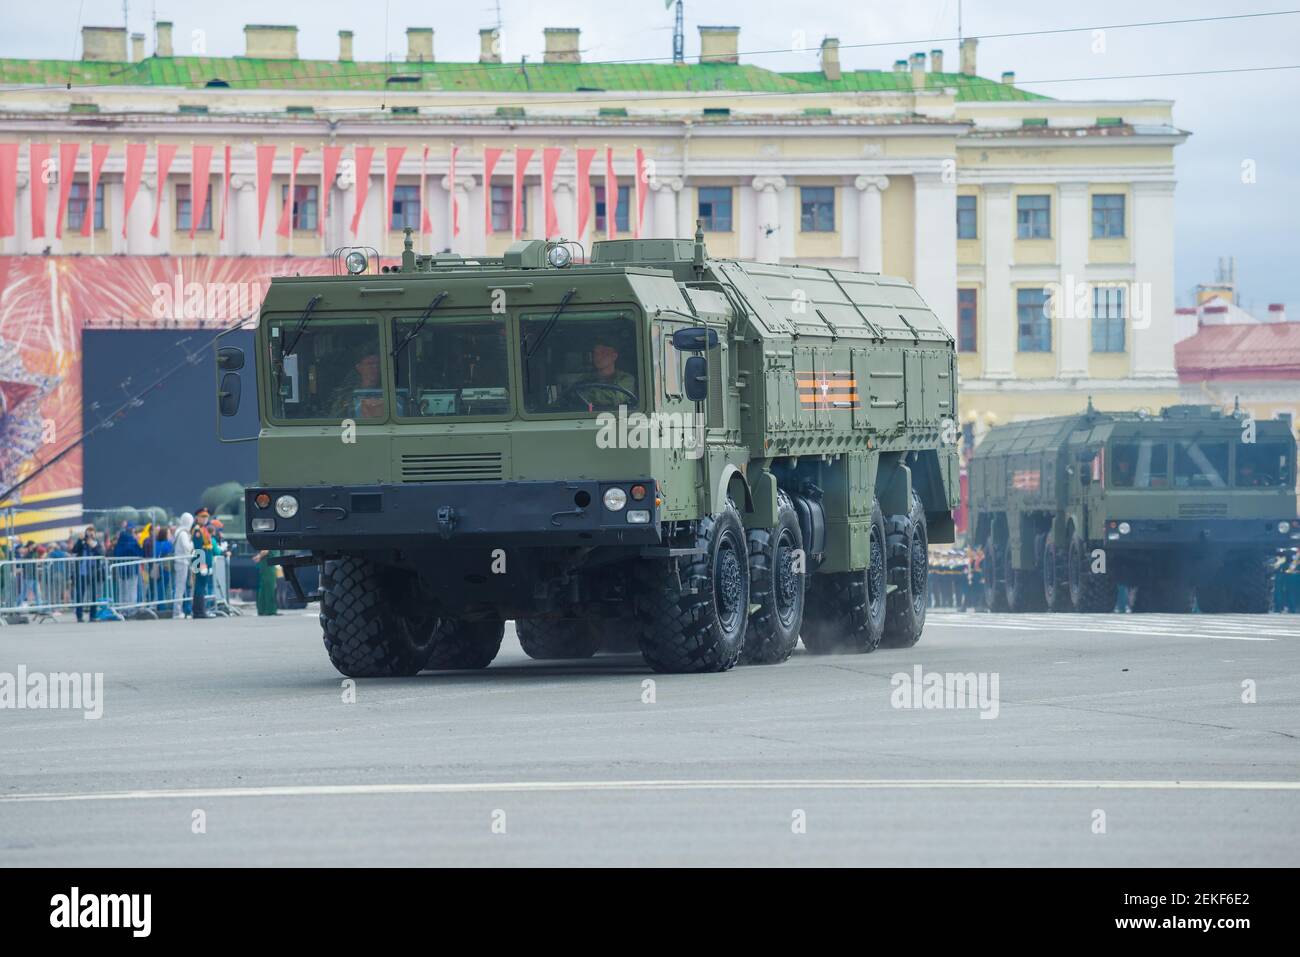 ST. PETERSBURG, RUSSIA - JUNE 20, 2020: Self-propelled launcher of the Iskander-M tactical missile system close-up. Fragment of the military parade in Stock Photo